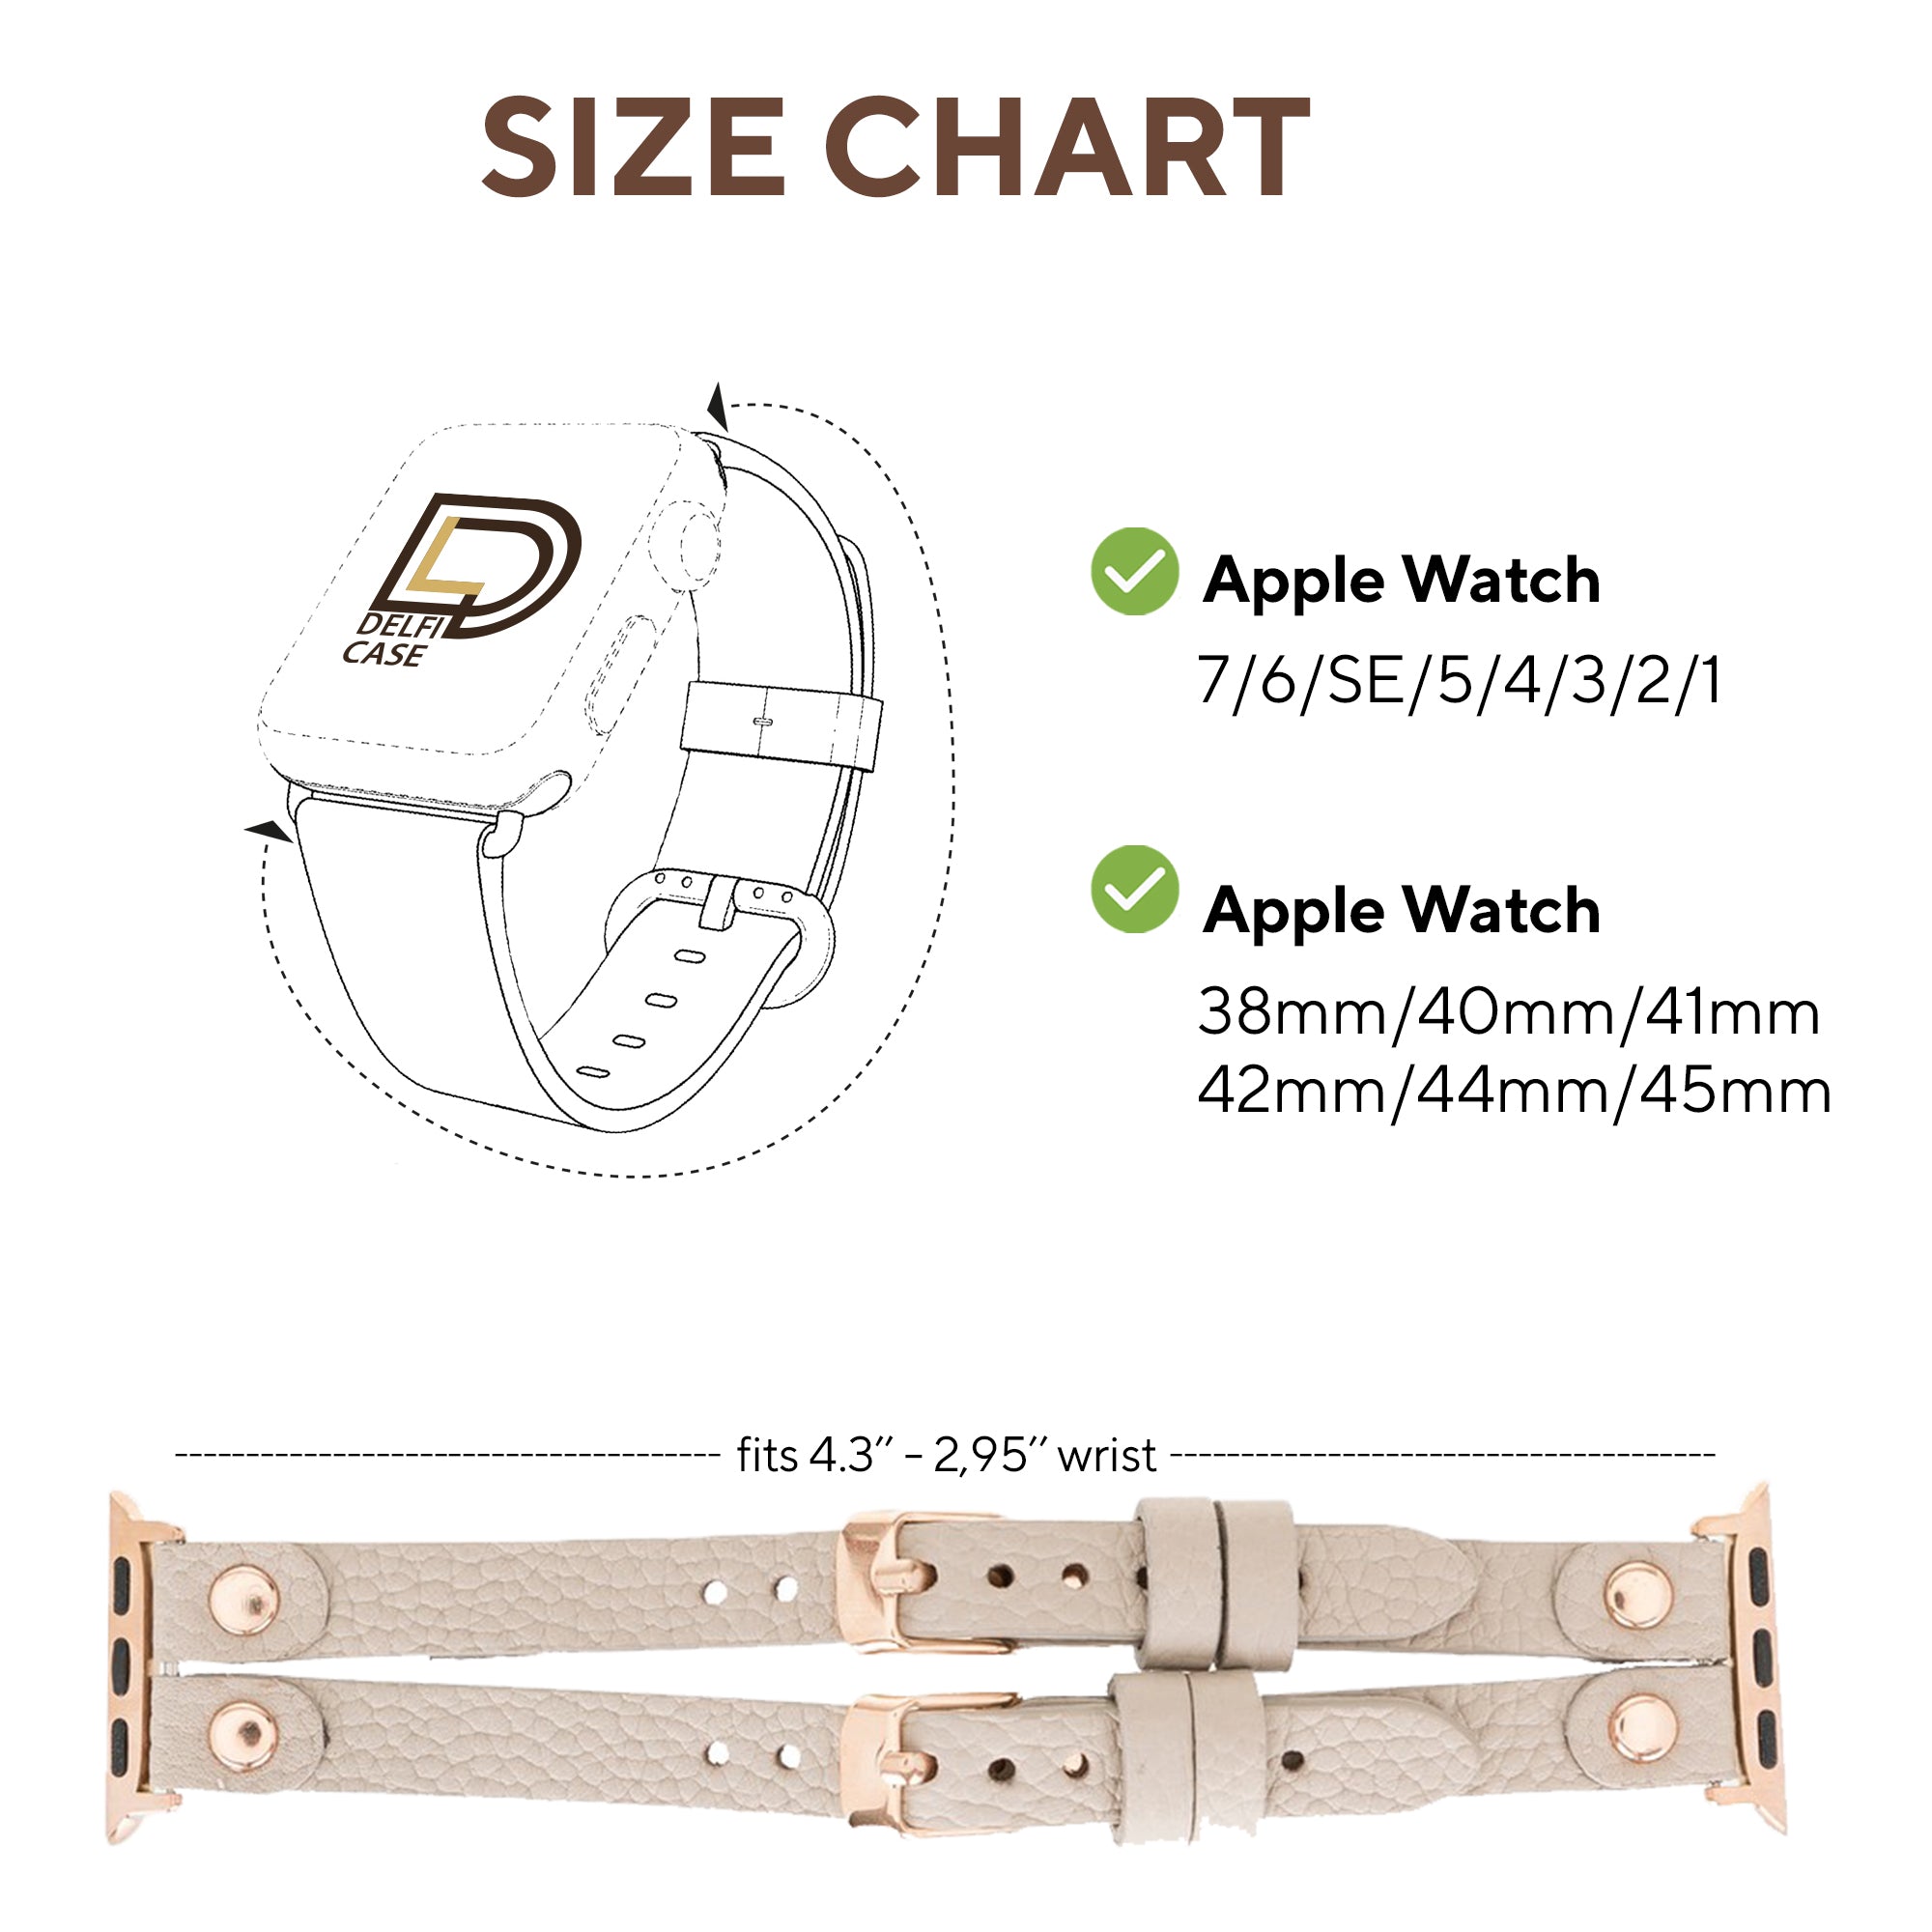 DelfiCase ELY Double Watch Band for Apple Watch and Fitbit Versa 3 2 & 1 (Beige) 4